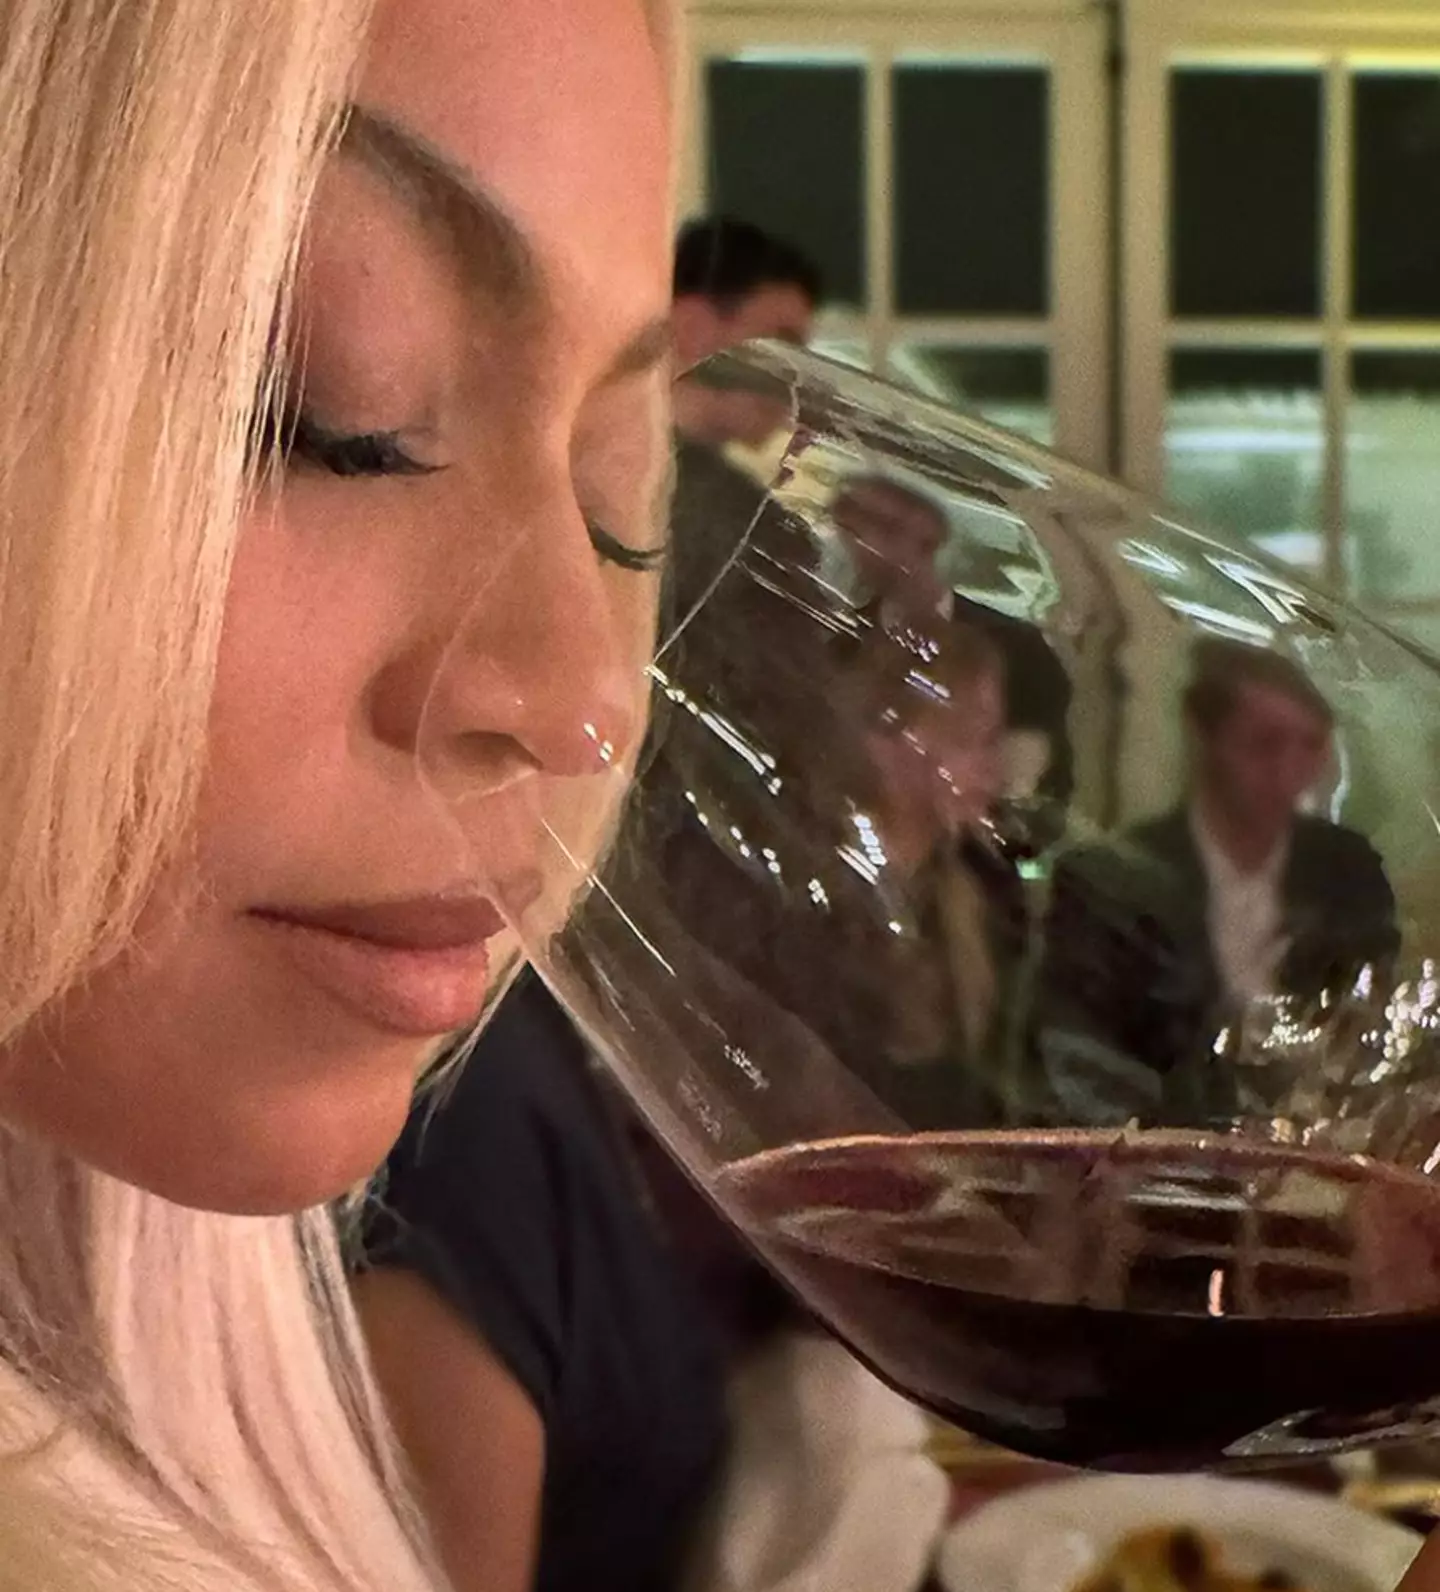 Beyoncé shared pictures of her enjoying the wine with friends.